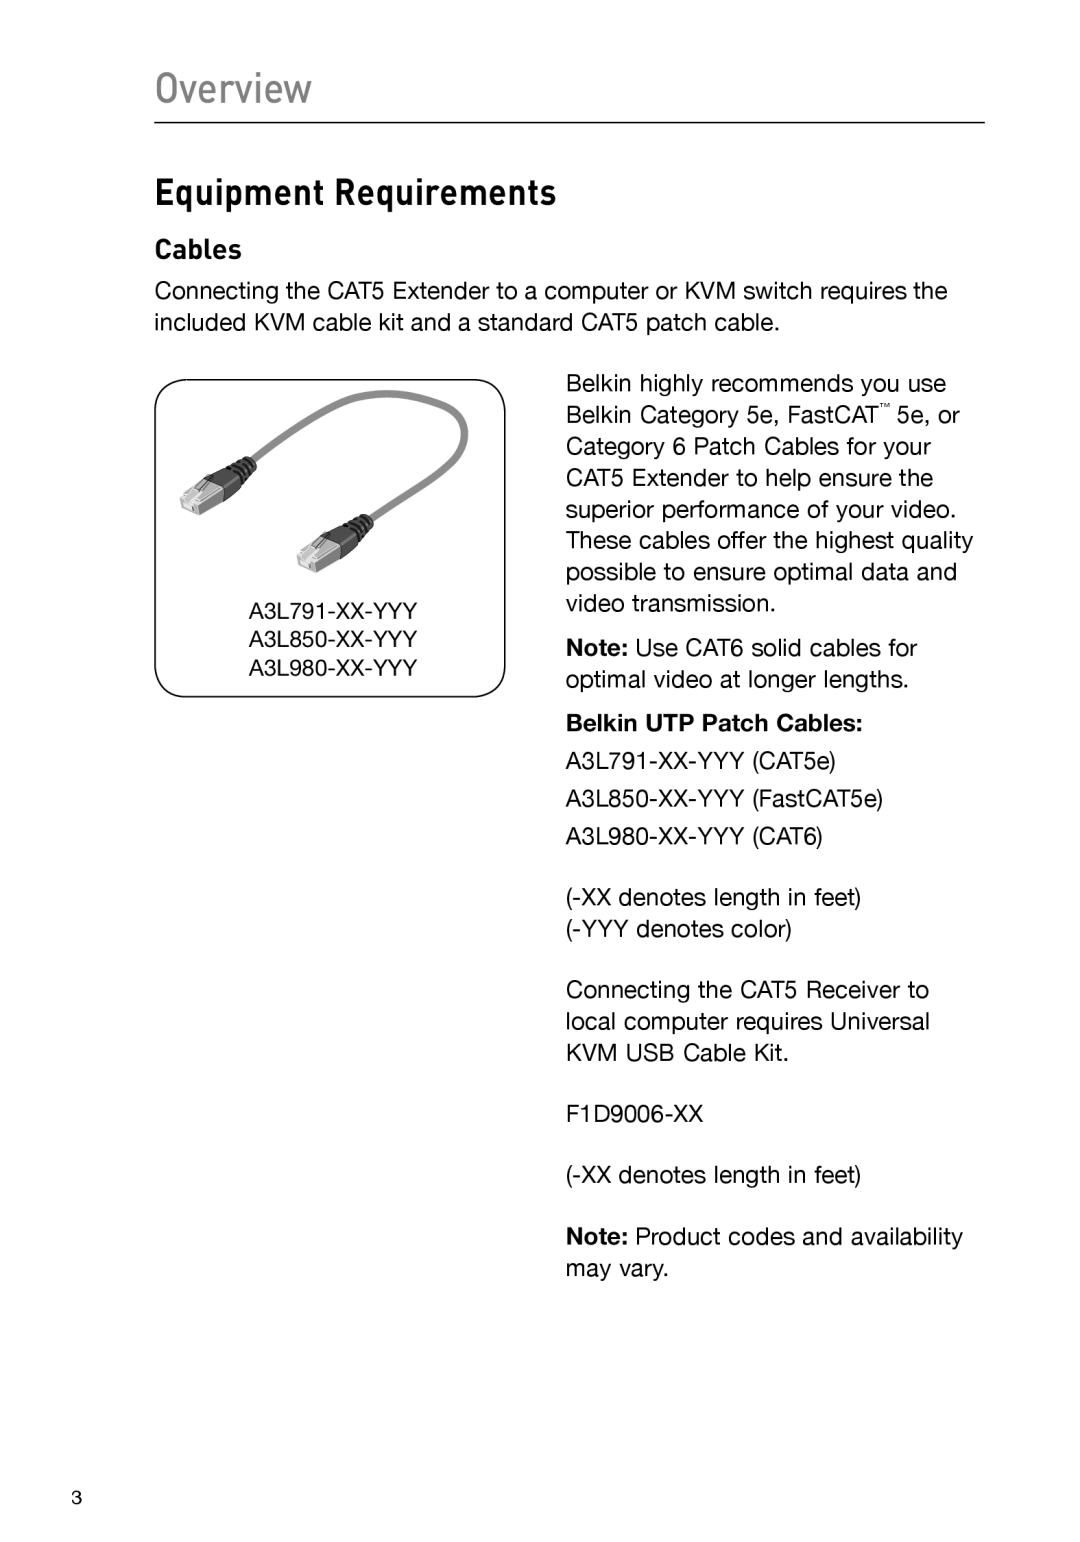 Belkin P75472-A manual Overview, Equipment Requirements, Belkin UTP Patch Cables 